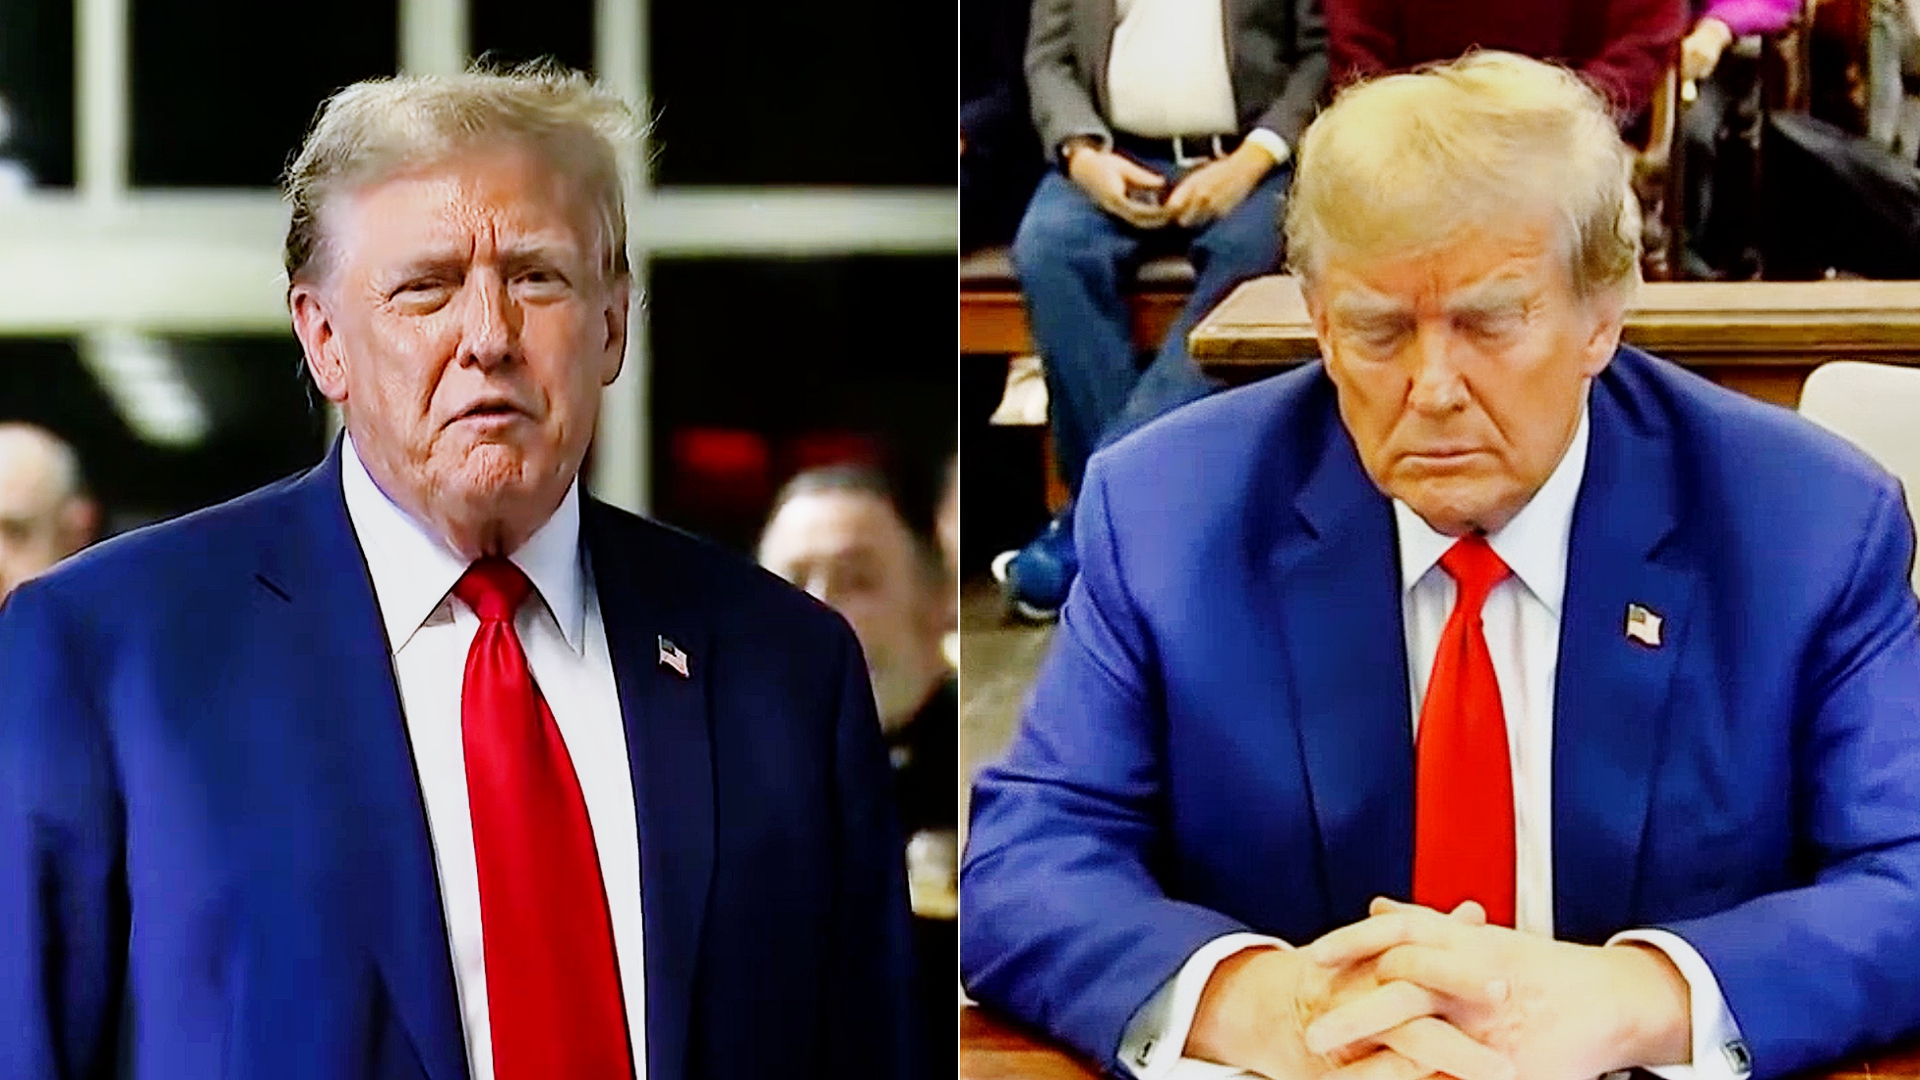 Trump Rages Against ‘People On TV Lying And Spewing Hate’ After He Was Caught Sleeping At Trial: ‘Take Off the Gag Order!’